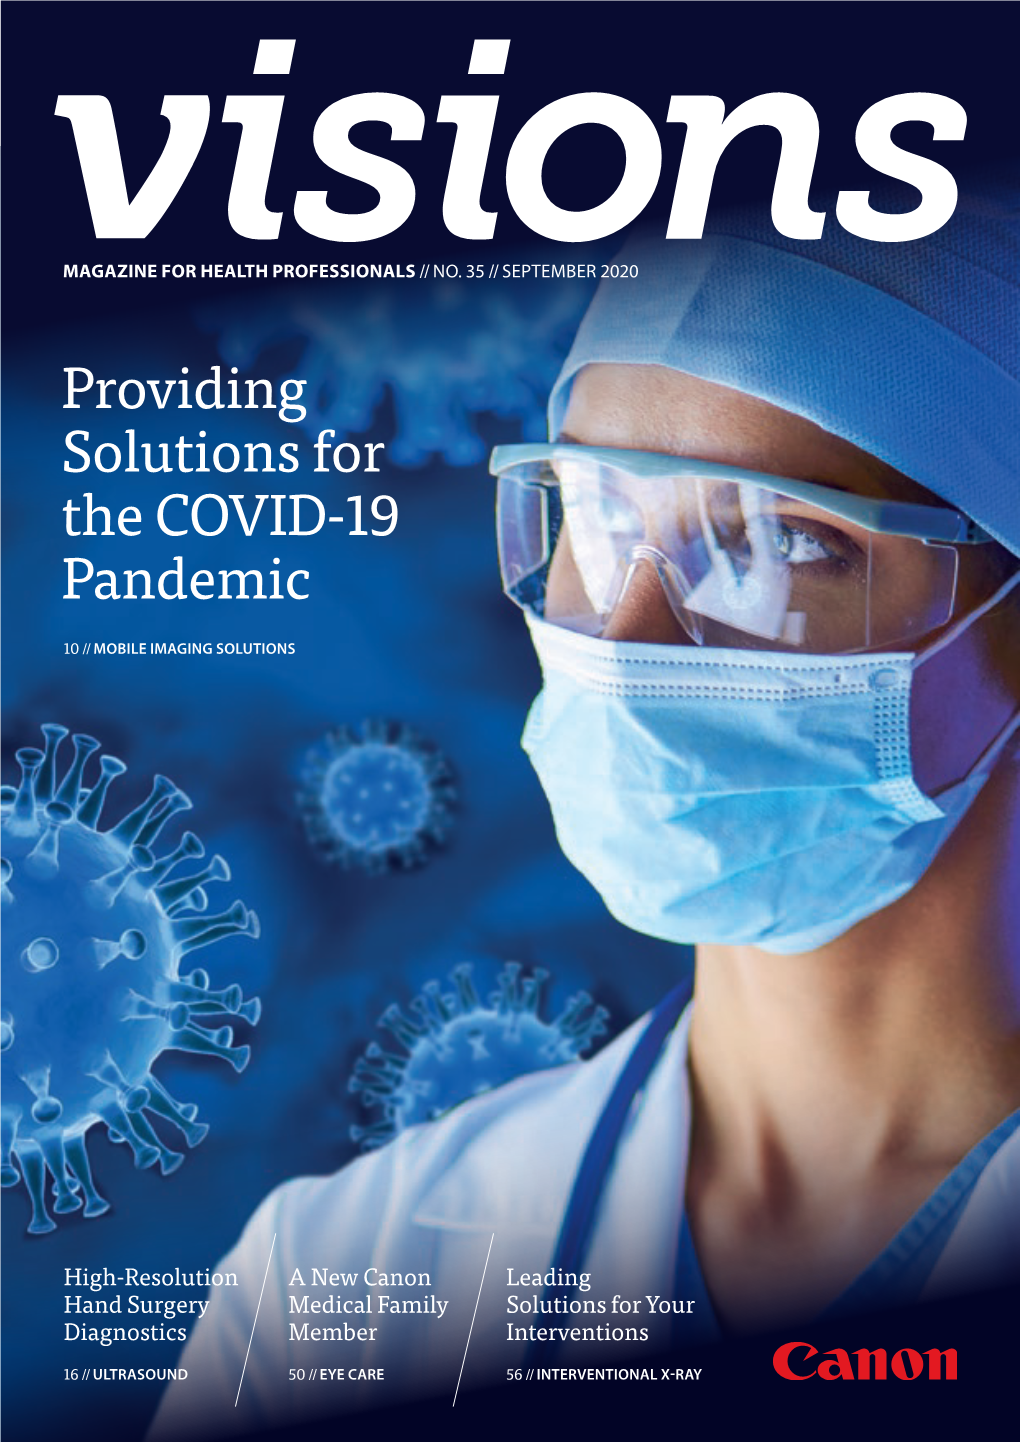 Providing Solutions for the COVID-19 Pandemic